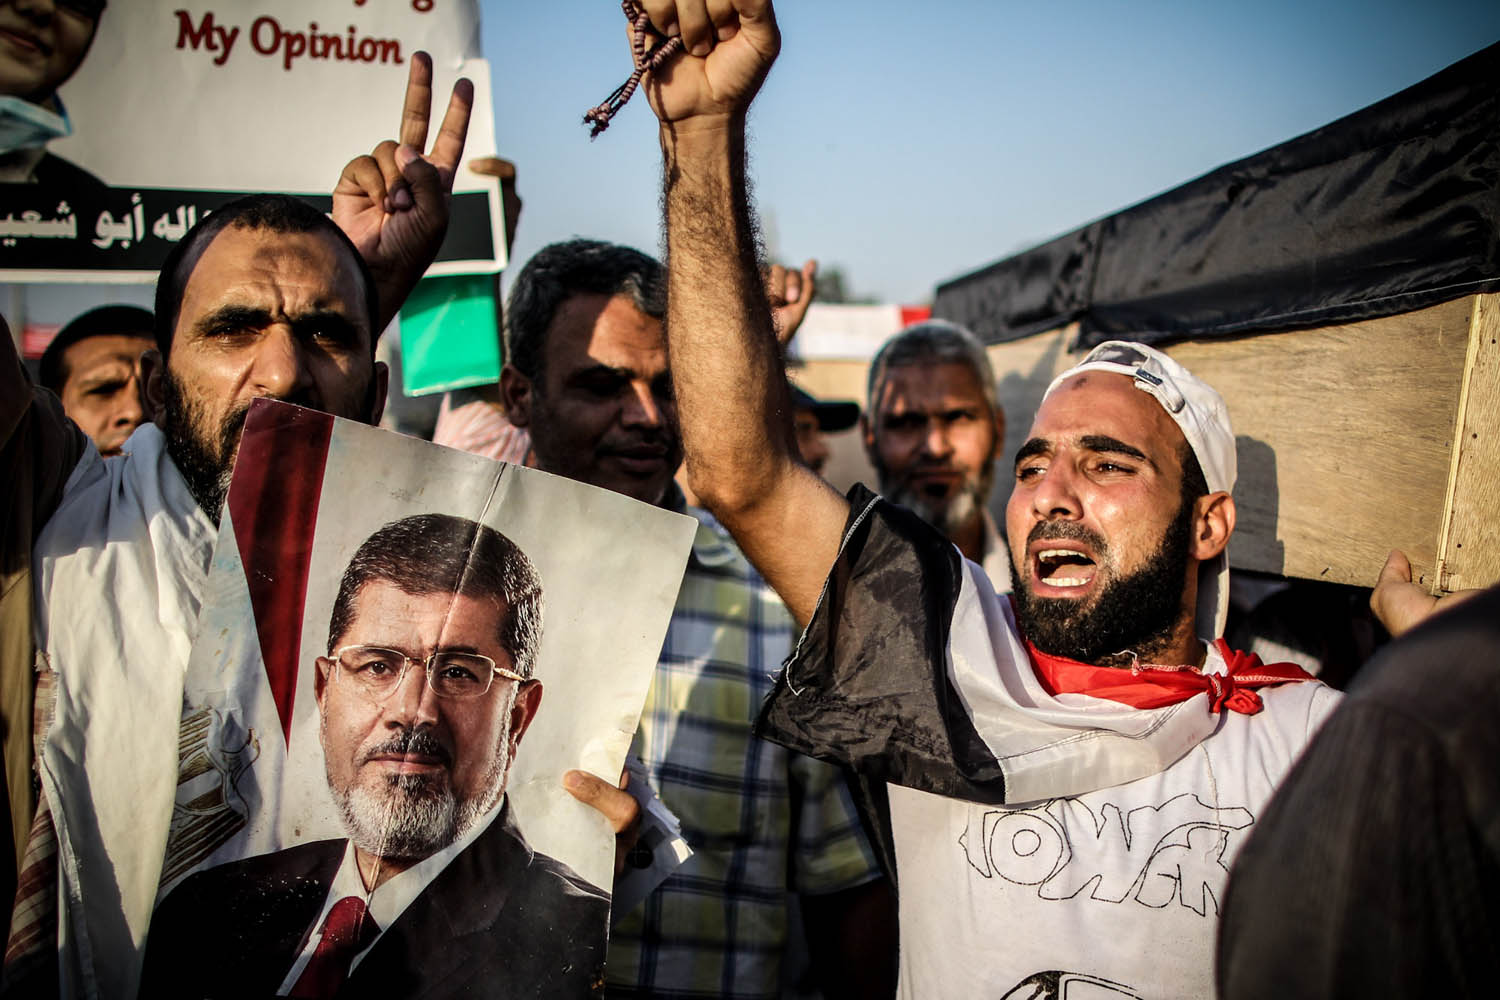 July 30, 2013. Morsi supporters chant for justice as they carry symbolic coffins of the victims of the Rabaa massacre. Tuesday saw big demonstrations against the coup after calls for a million man march in honor of Sunday's victims.